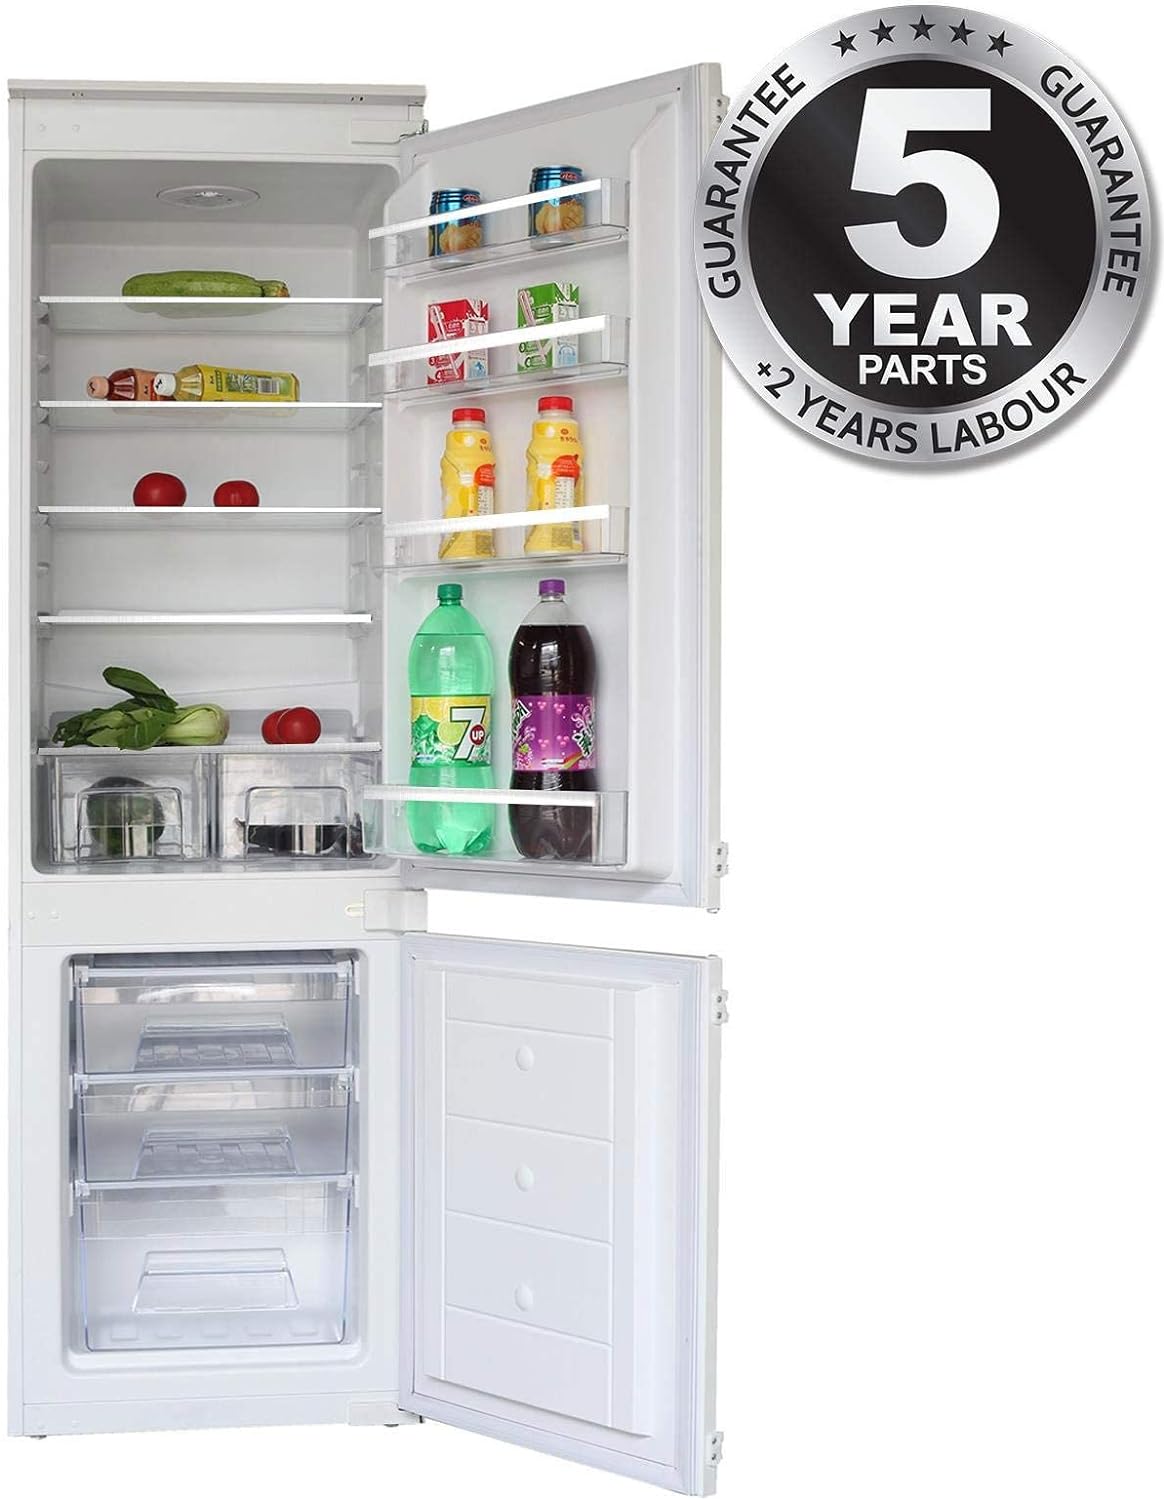 SIA RFI104 70/30 Split Built In Integrated 260L Fridge Freezer With Sliding Fittings   Import  Single ASIN  Import  Multiple ASIN ×Product customization General Description Gallery Reviews Variations Additional details Product Tags - Amazing Gadgets Outlet